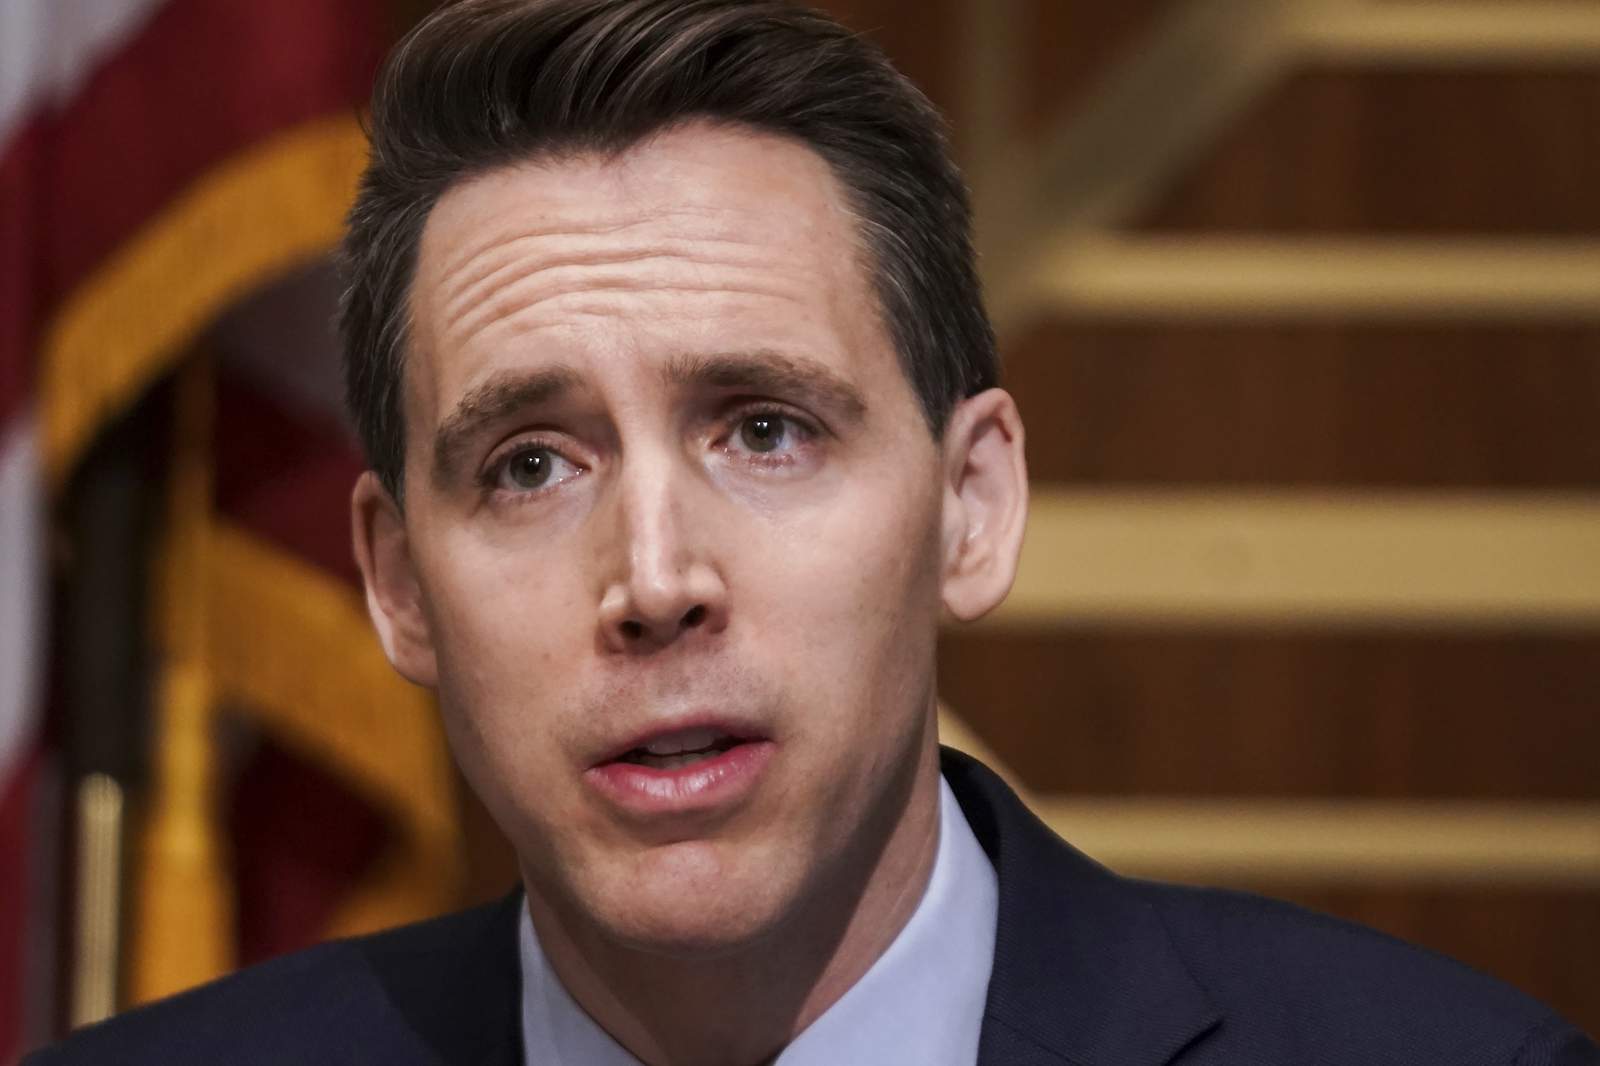 Republicans recoil from Missouri Sen. Hawley after siege